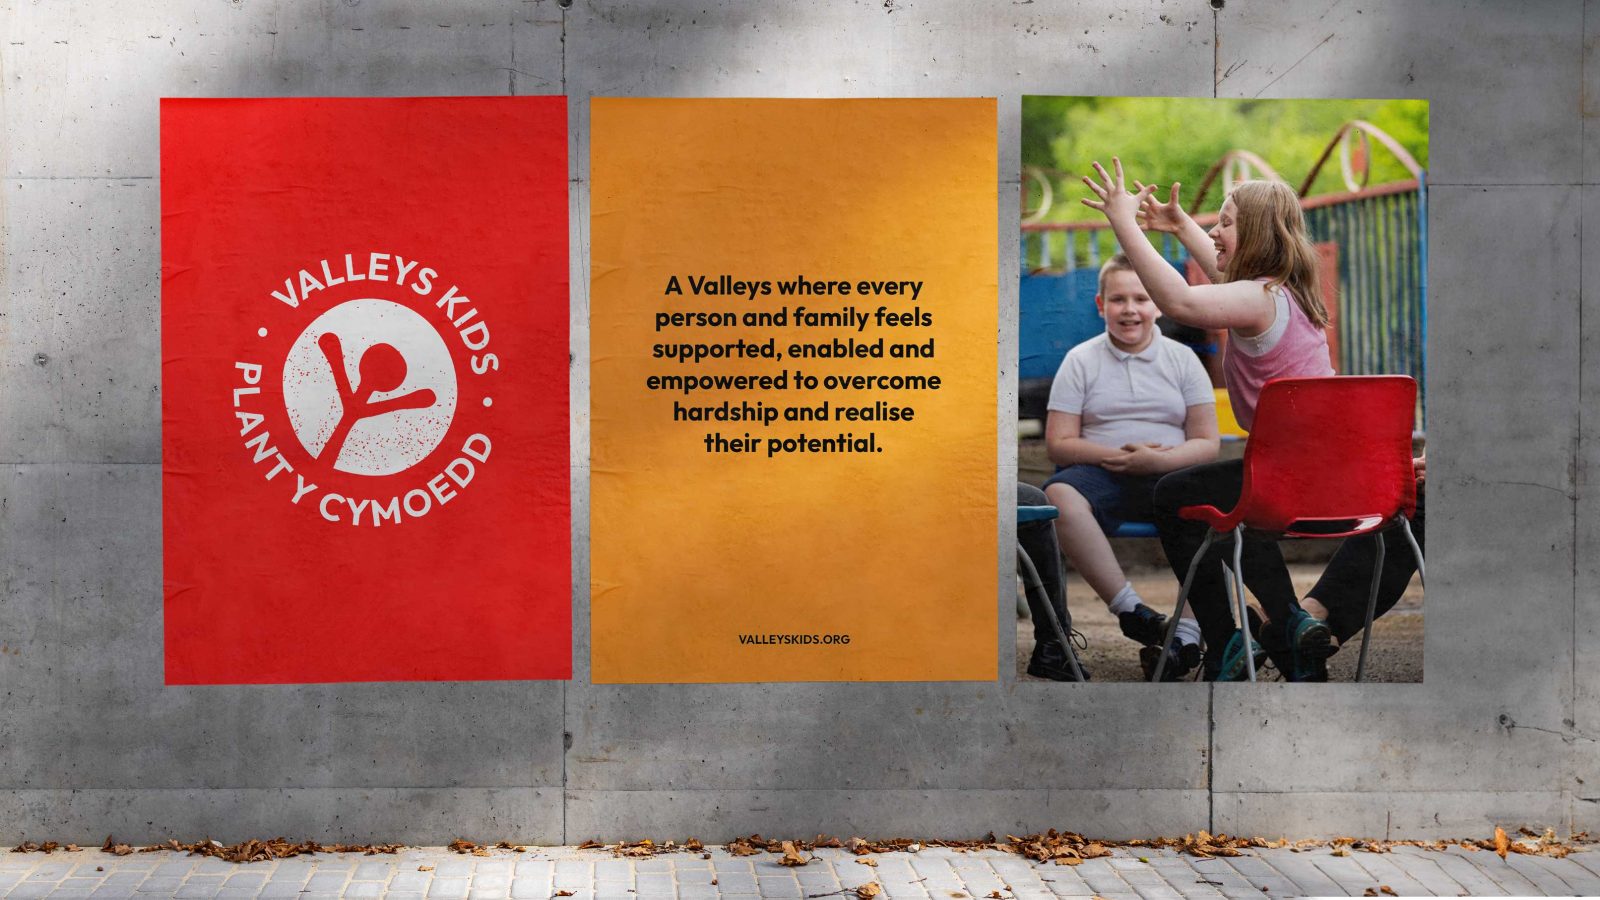 Two promotional banners displayed on a gray concrete wall. The left banner, created by a brand design agency, features a red logo with the text 